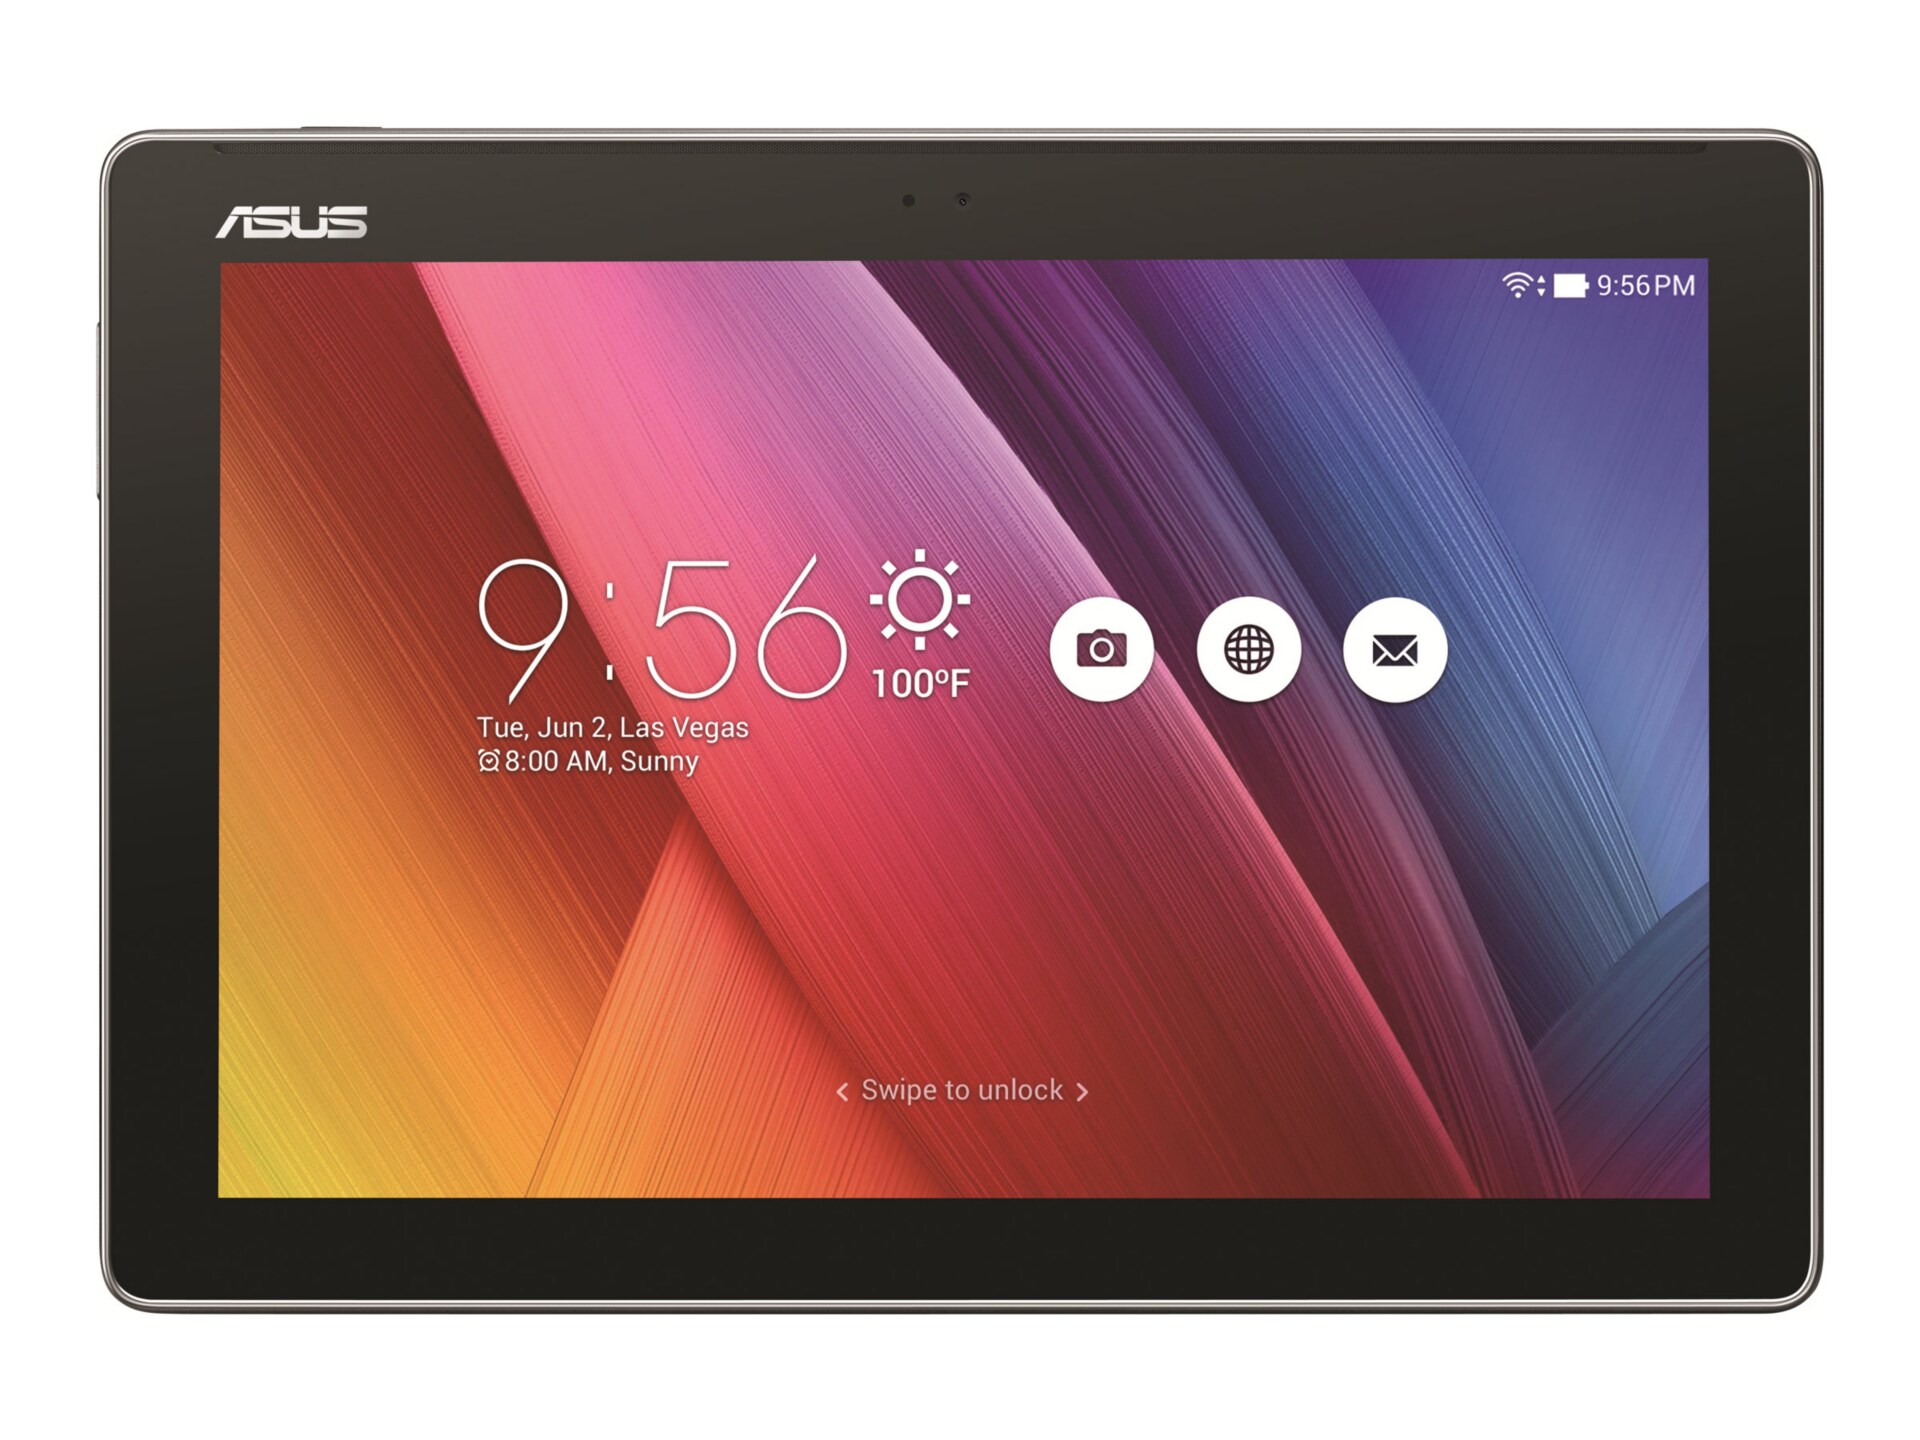 ASUS ZenPad 10 Z300M - tablet - Android 6.0 (Marshmallow) - 16 GB - 10.1"